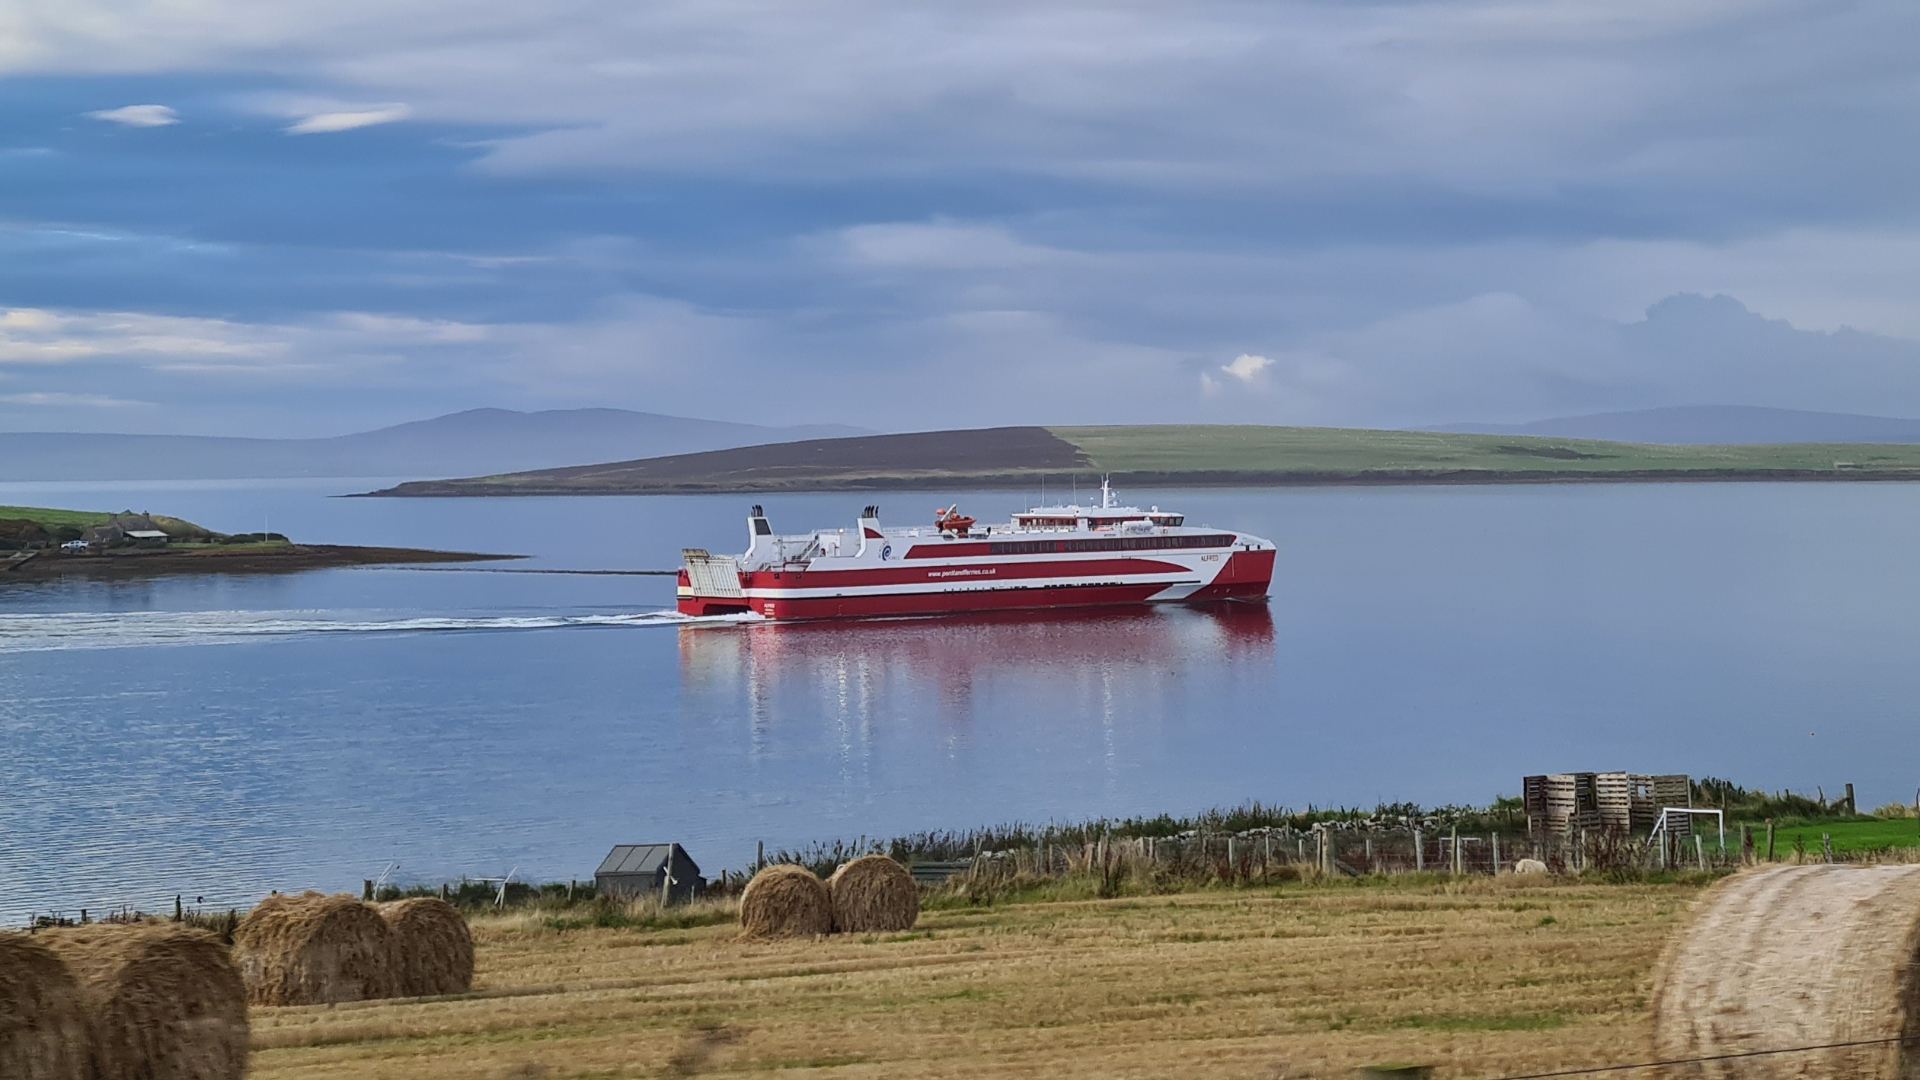 MV Pentalina had only resumed service on Wednesday to allow the MV Alfred (pictured) to service CalMac routes on the west coast of Scotland.